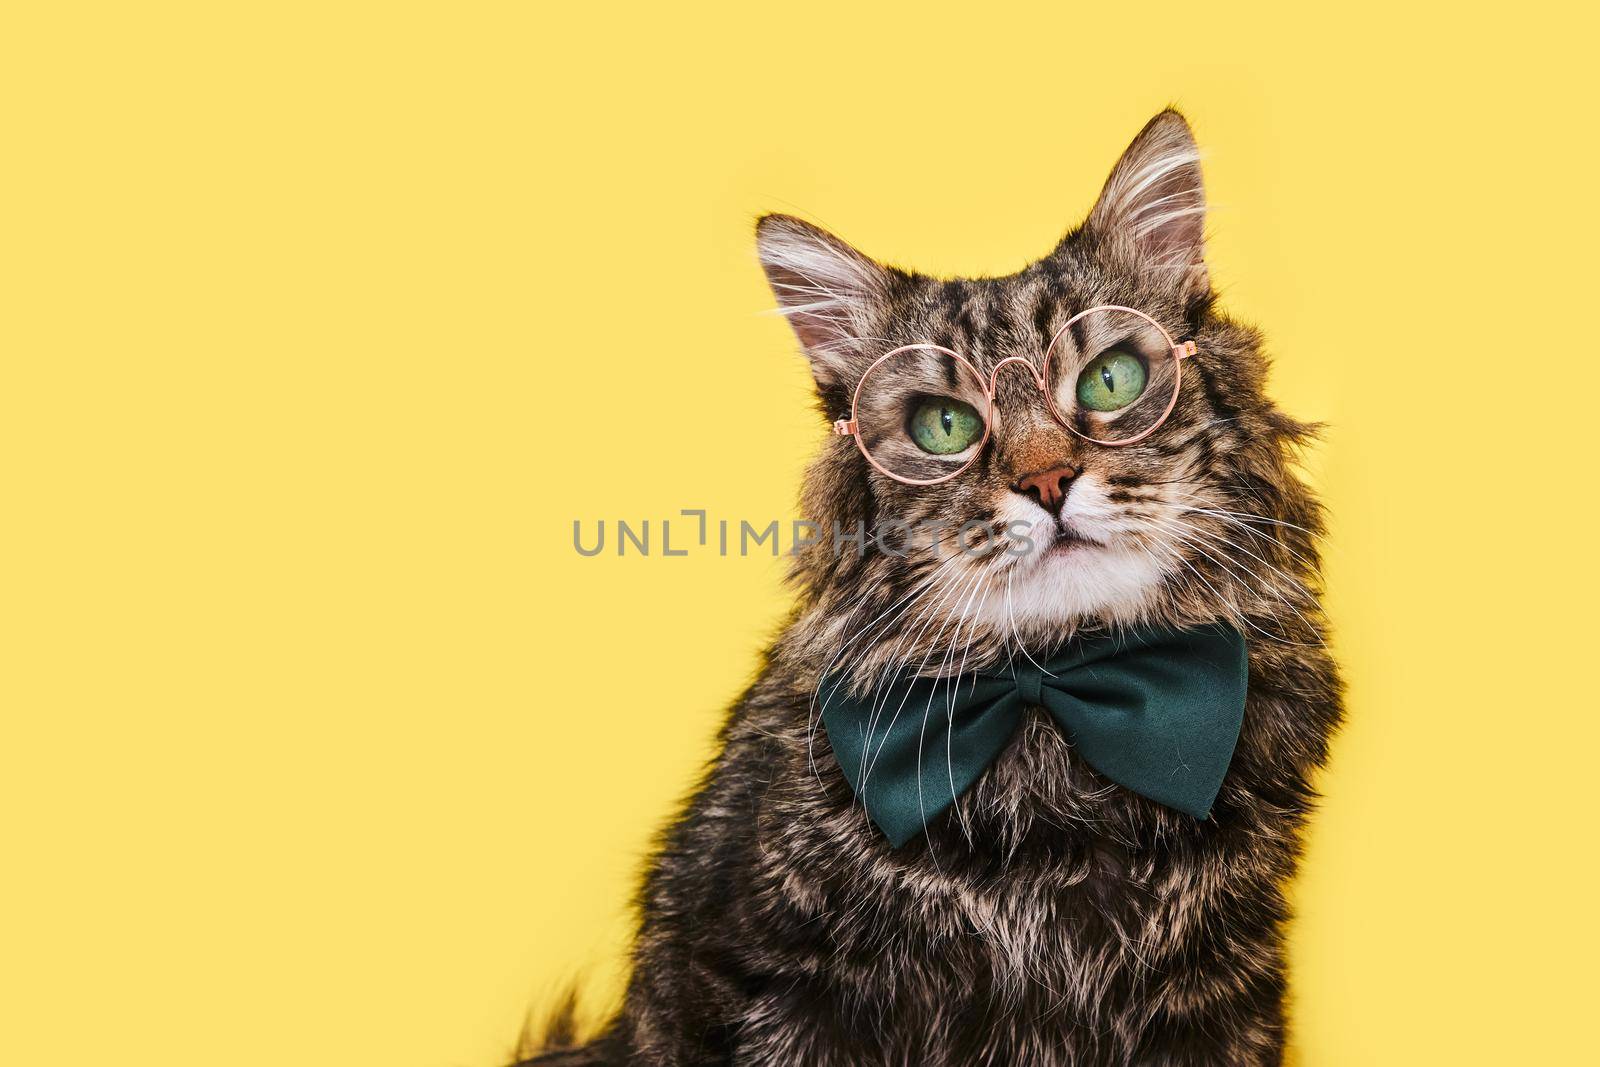 Funny smart cat in bow tie and glasses sitting on yellow background, copy space for text. Optics glasses store, creative advertisement. Online courses, remote distant education concept.